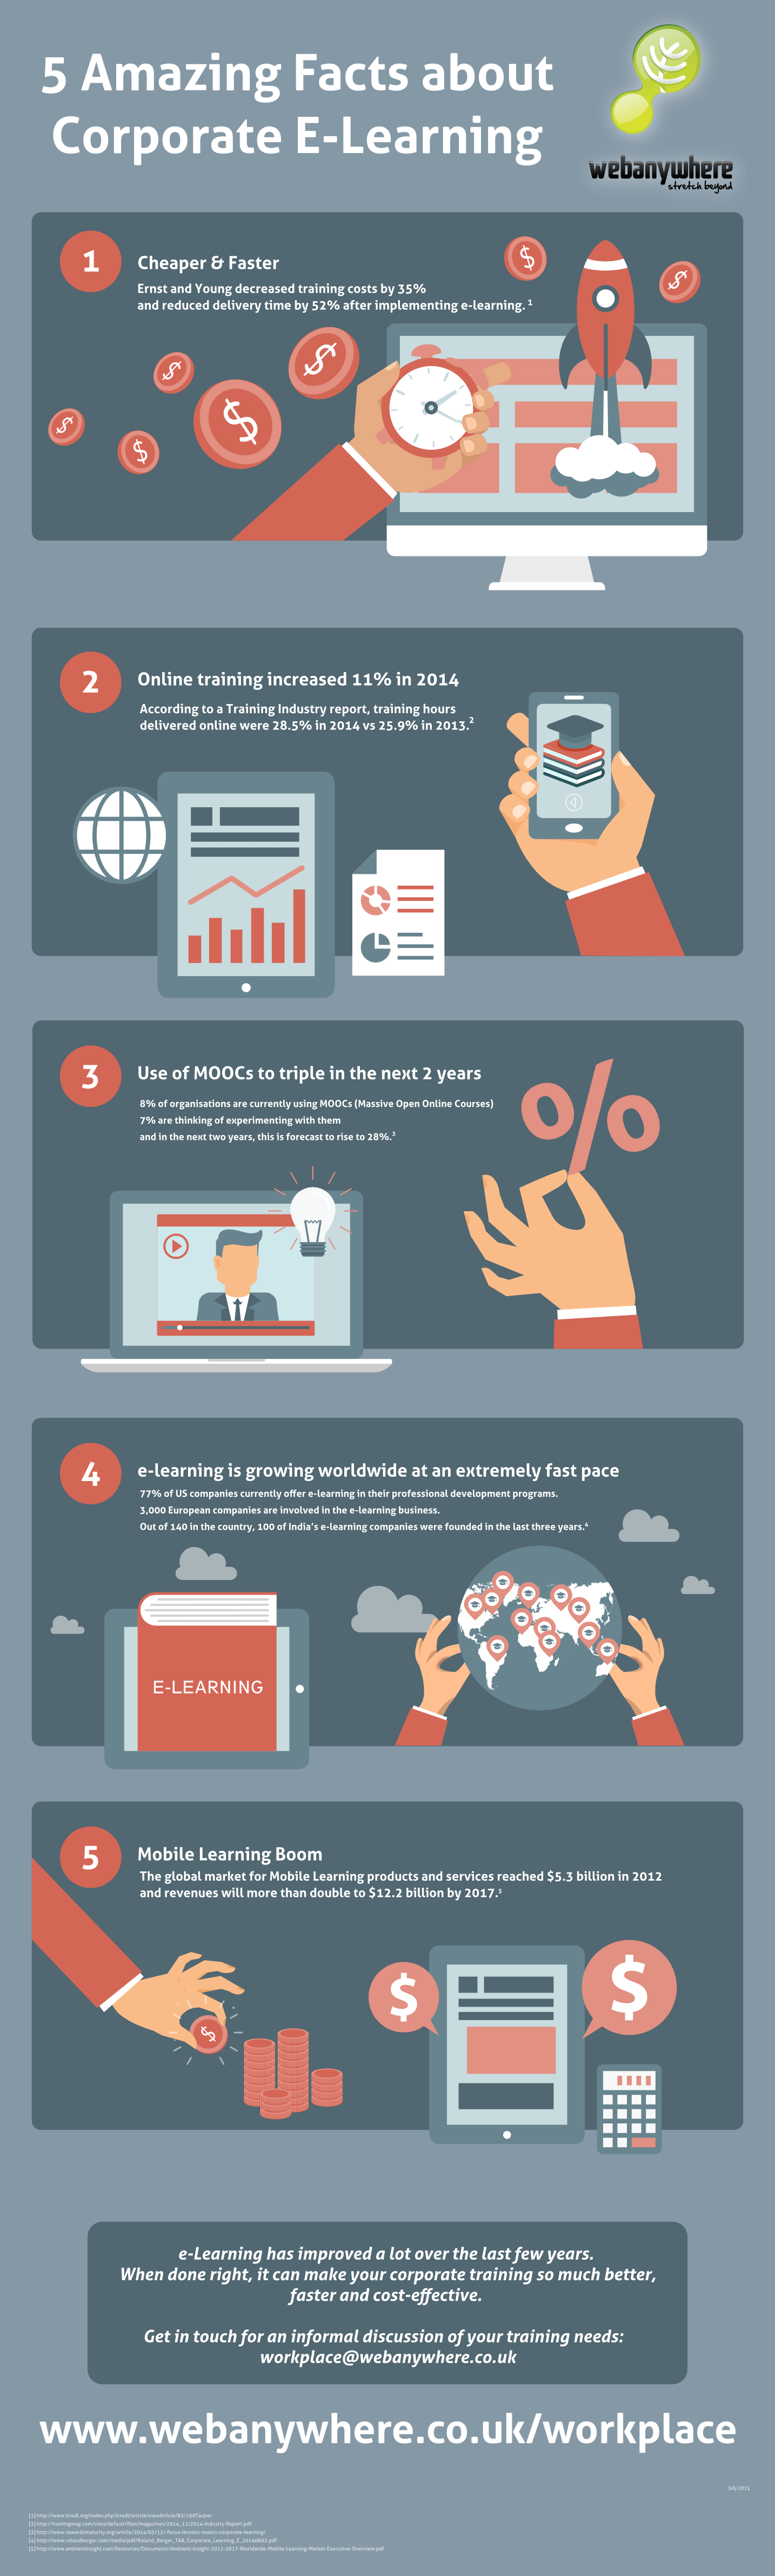 5 Amazing Facts about Corporate eLearning Infographic